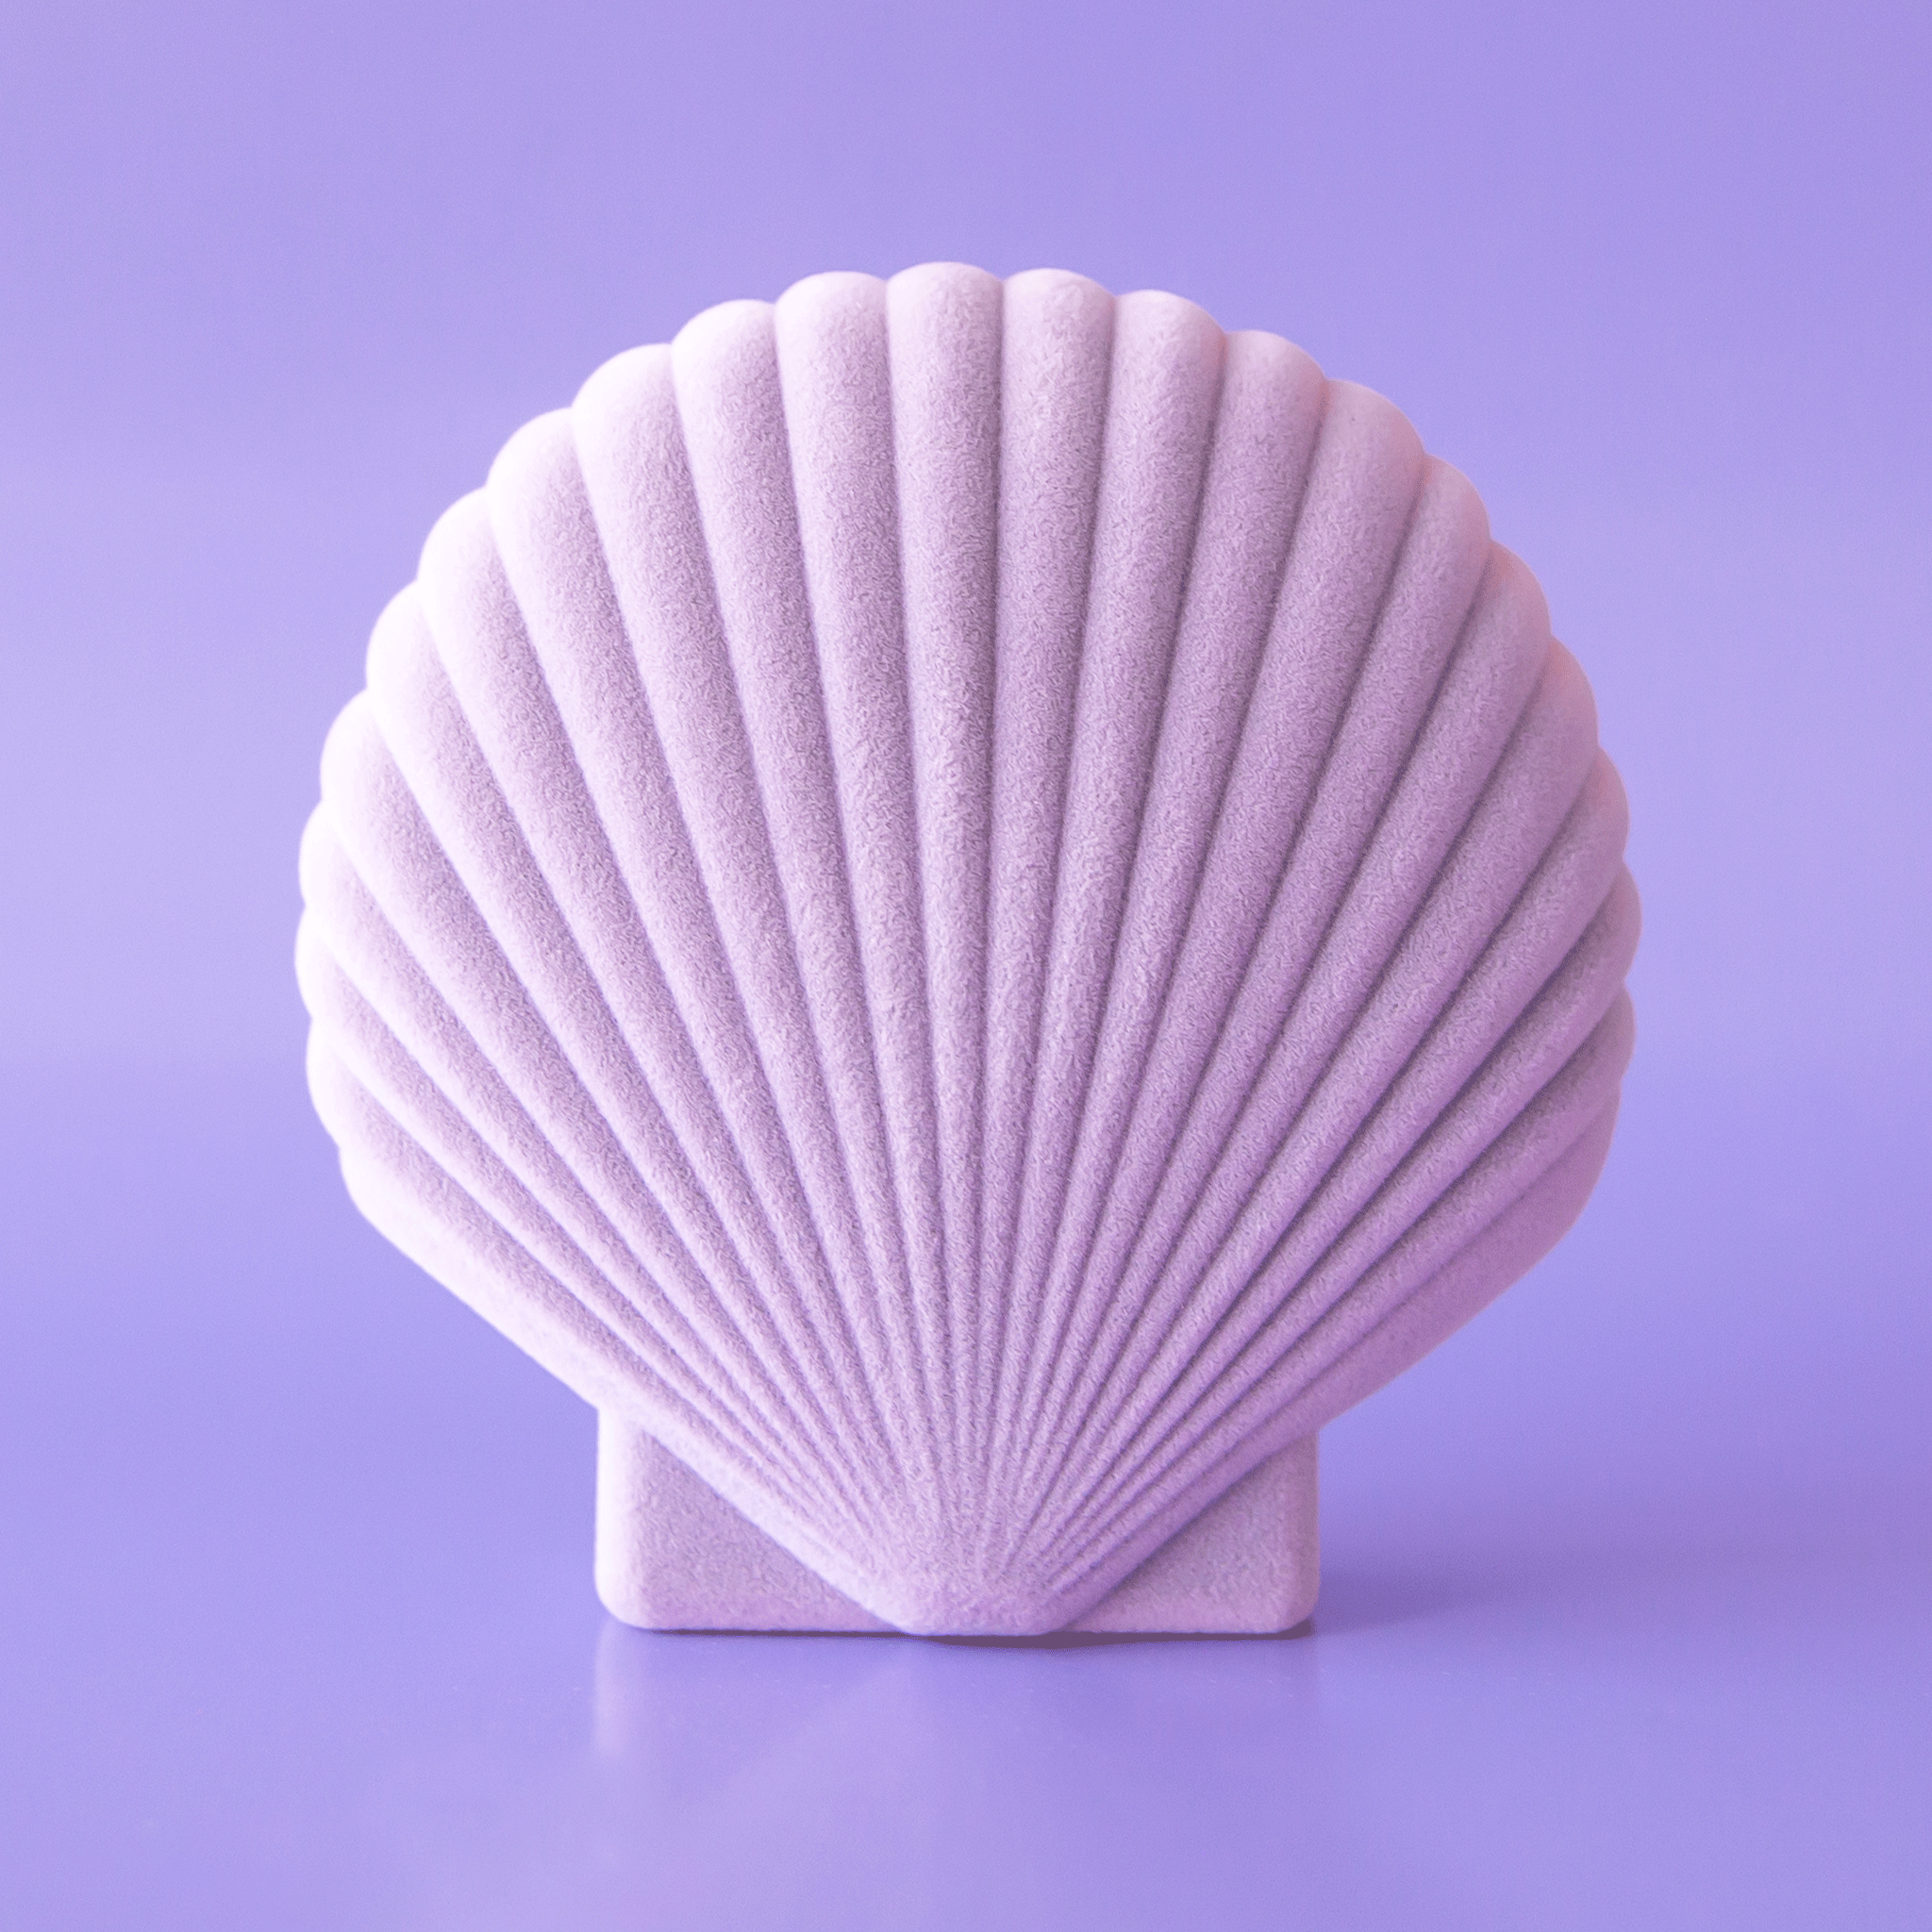 On a purple background is a purple plastic and velvet jewelry / storage box in the shape of a sea shell.  